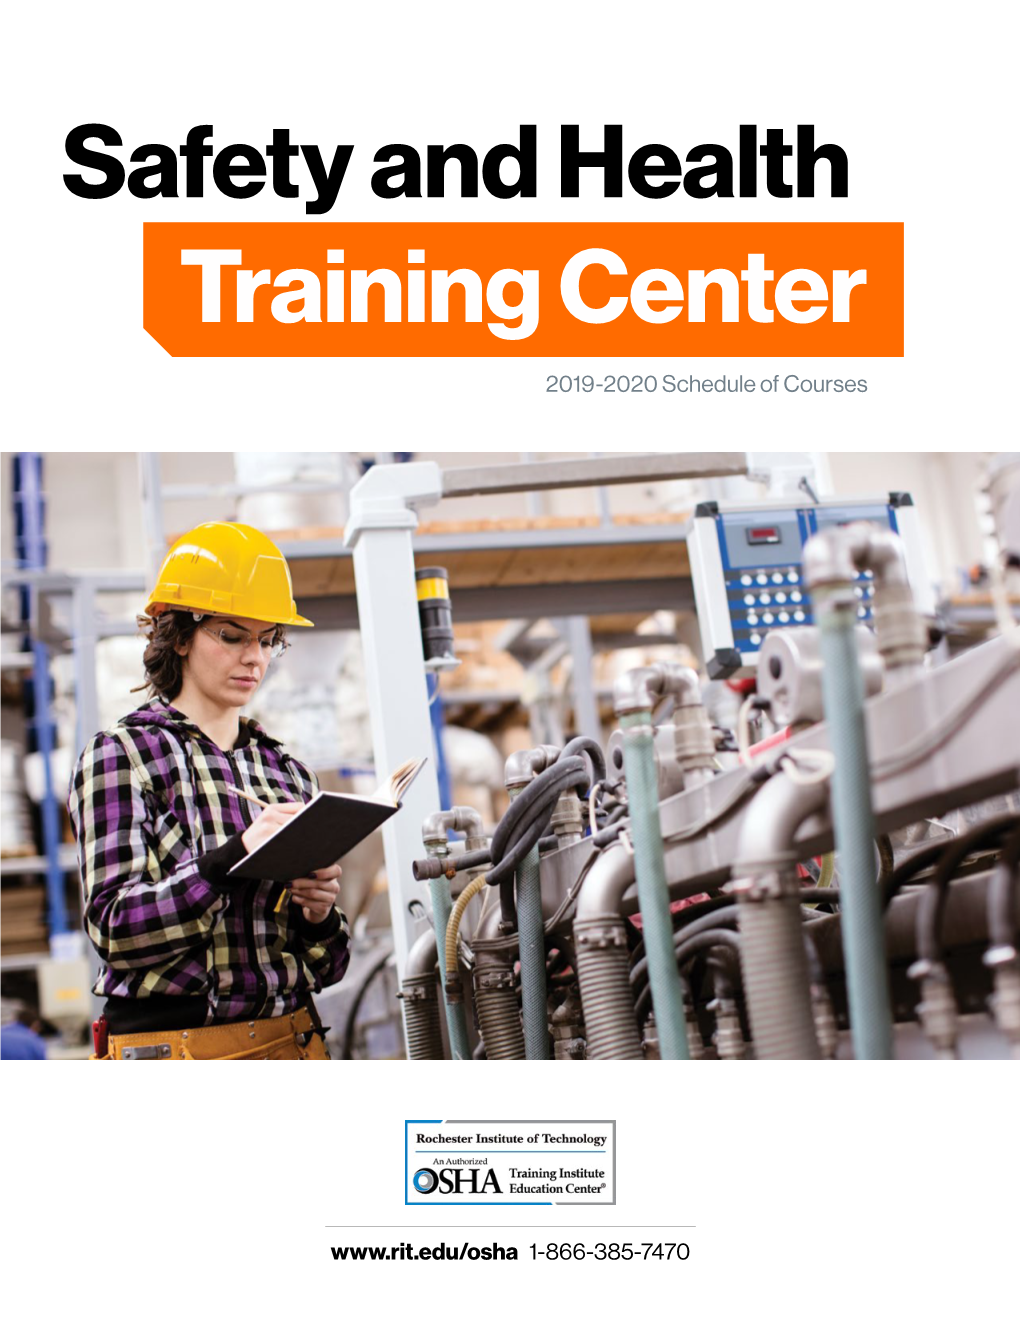 Training Center Safety and Health